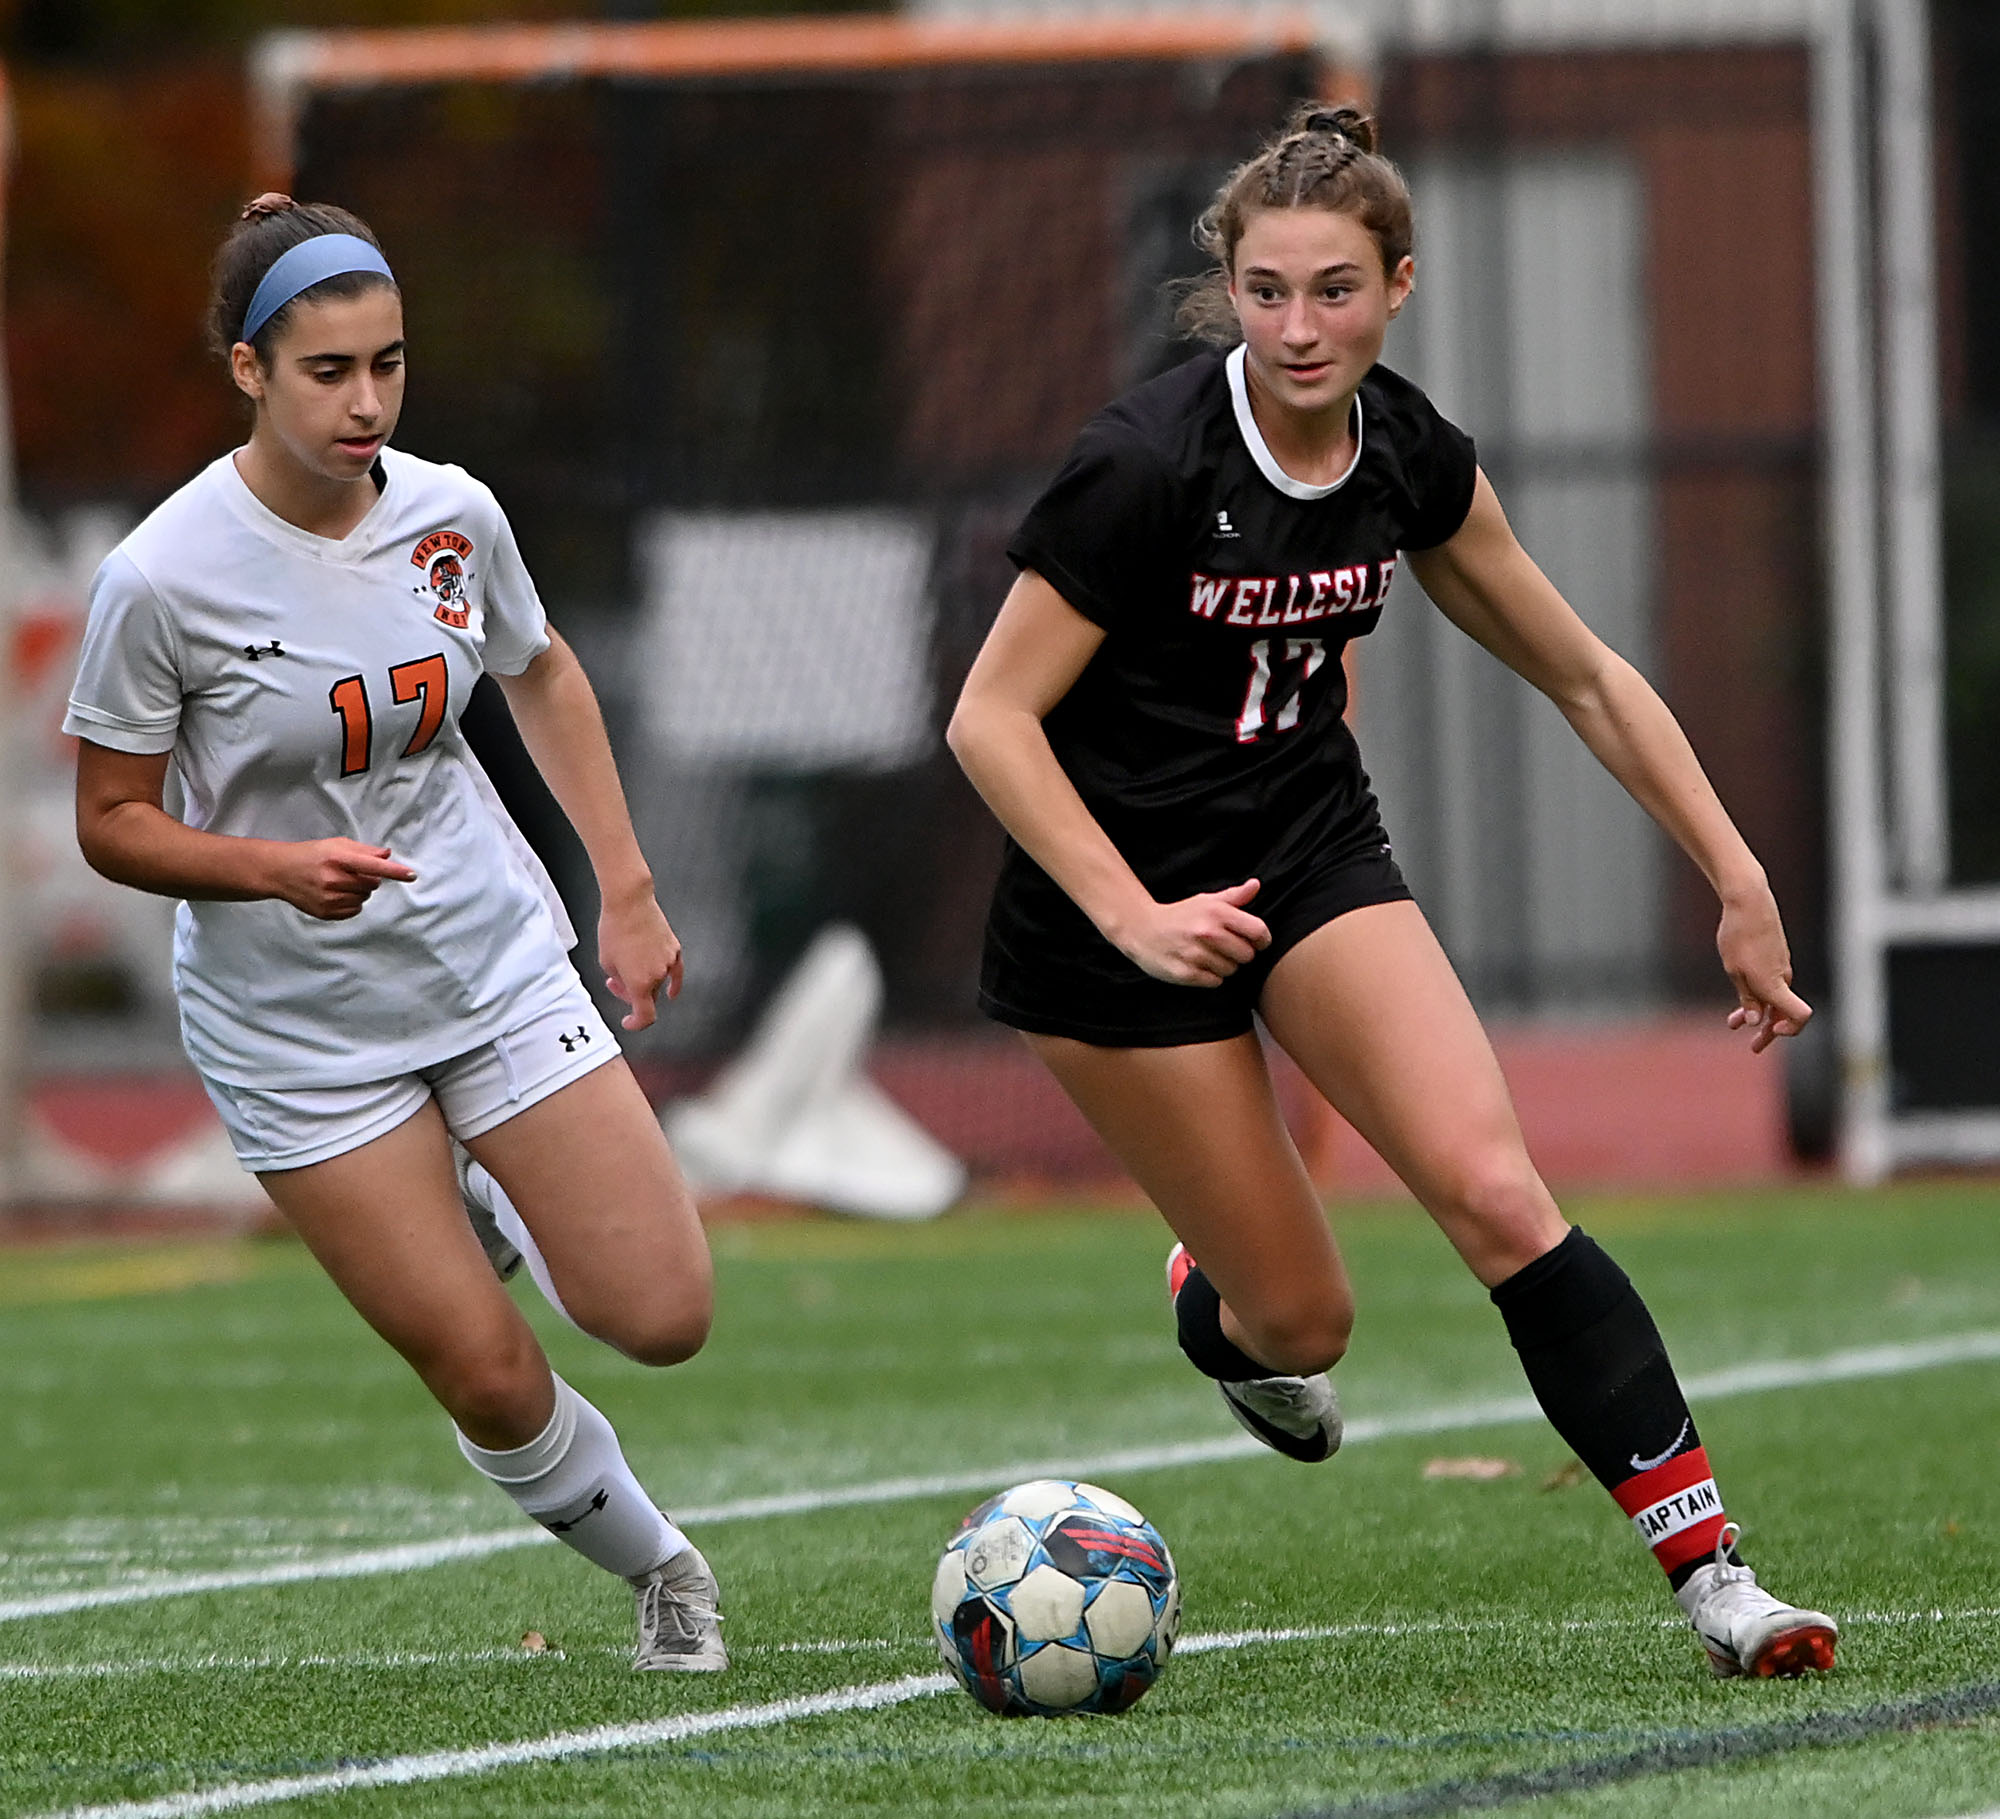 After a rocky start, the Wellesley girls' soccer team has righted its ship  and on a 10-game win streak - The Boston Globe